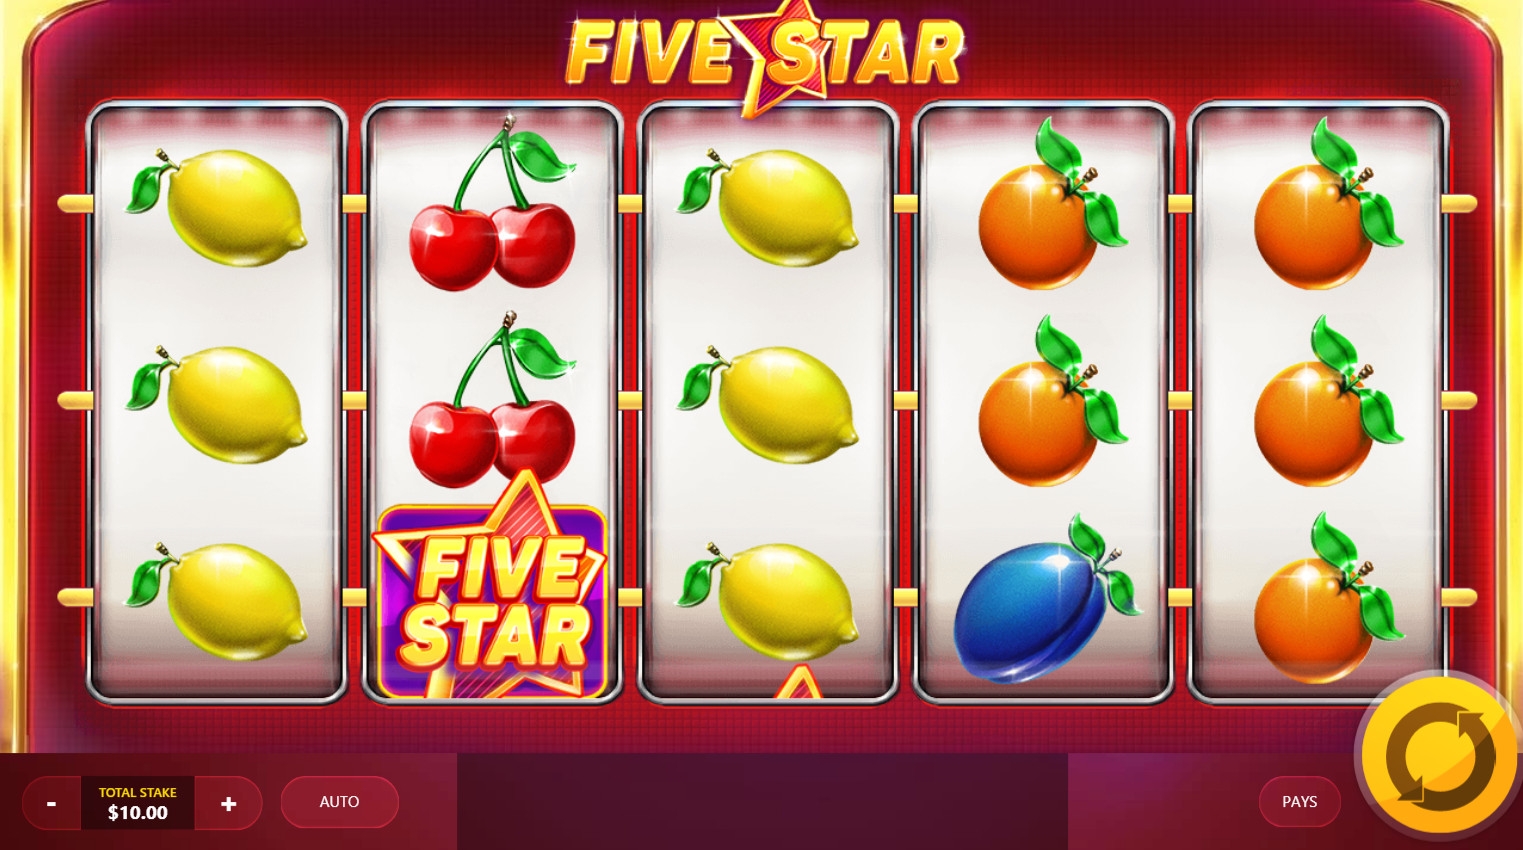 Five Star (Five Star) from category Slots